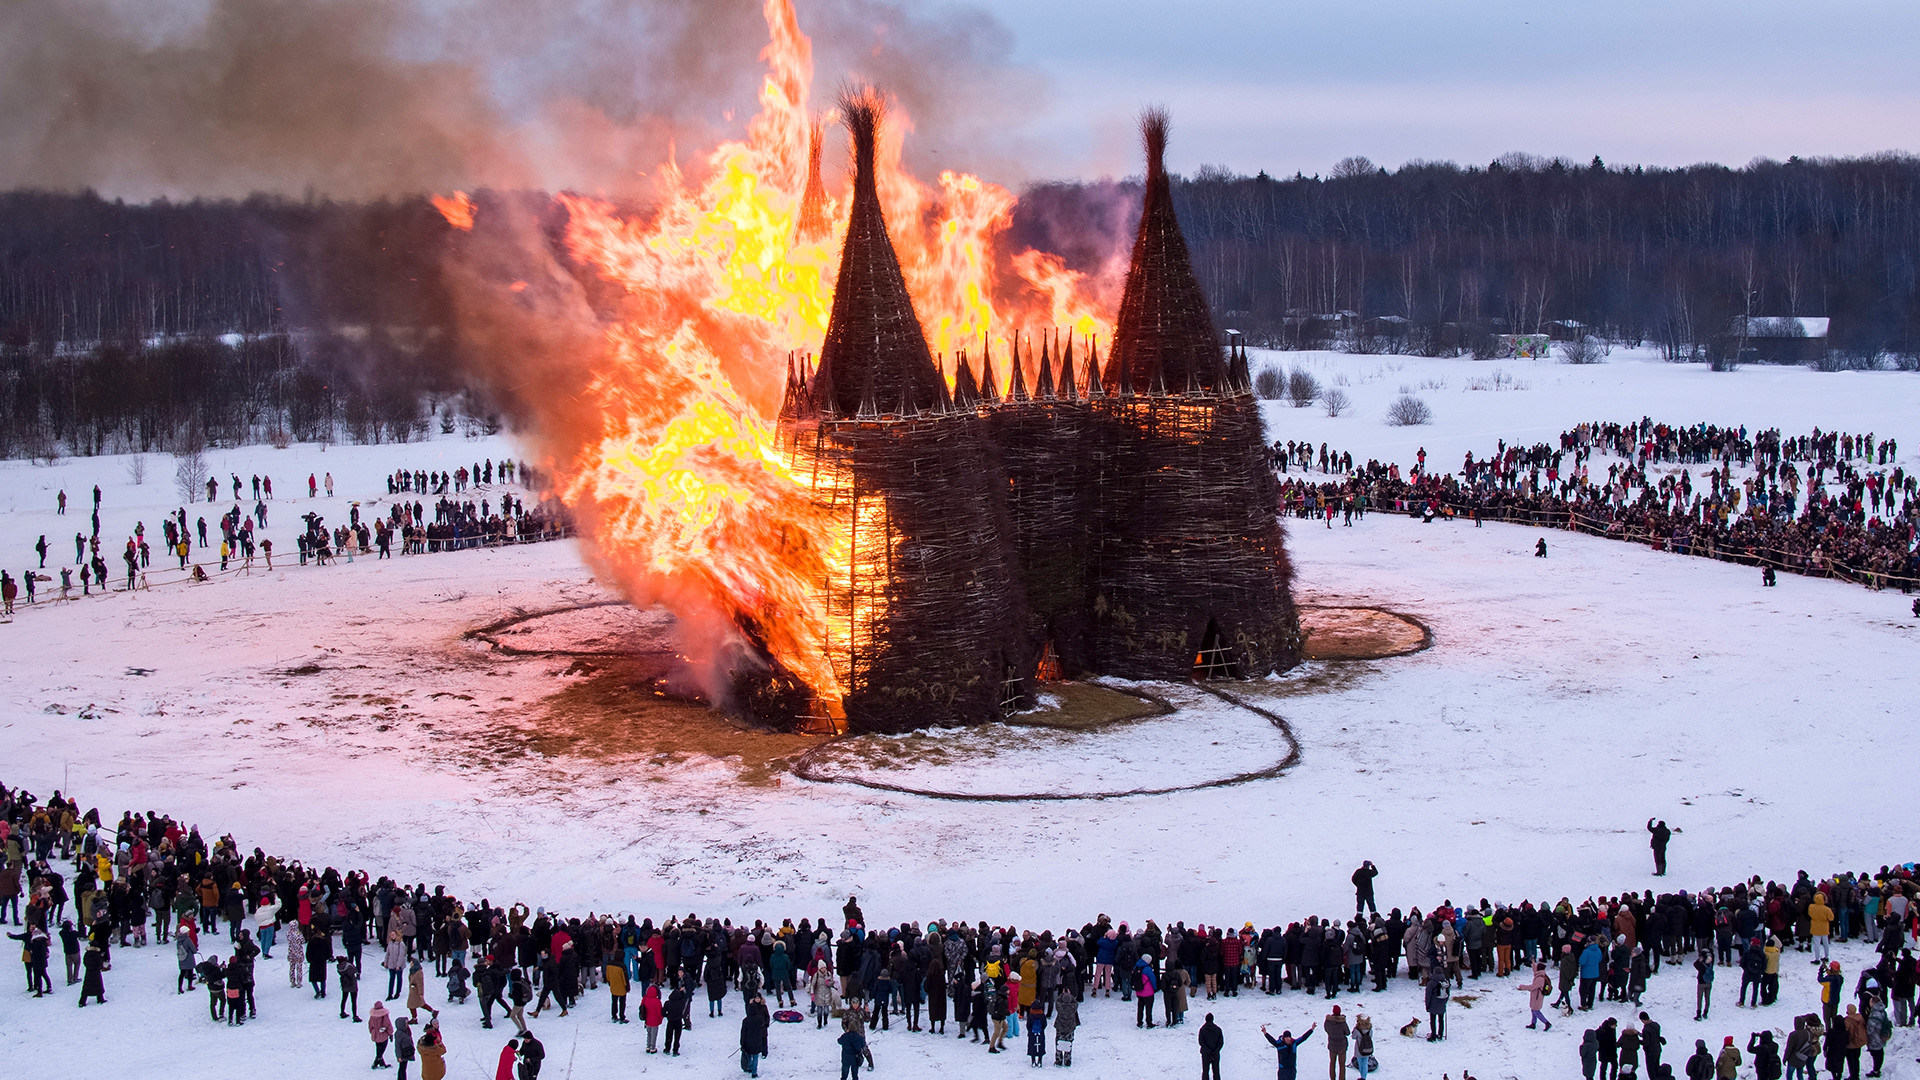 People watch a castle-shape wooden construction burning as part of celebrations at the Maslenitsa (Shrovetide) festival at the Nikola-Lenivets art park in Nikola-Lenivets village, about 200 kilometers (125 miles) south-west of Moscow, Russia, Saturday, March 13, 2021